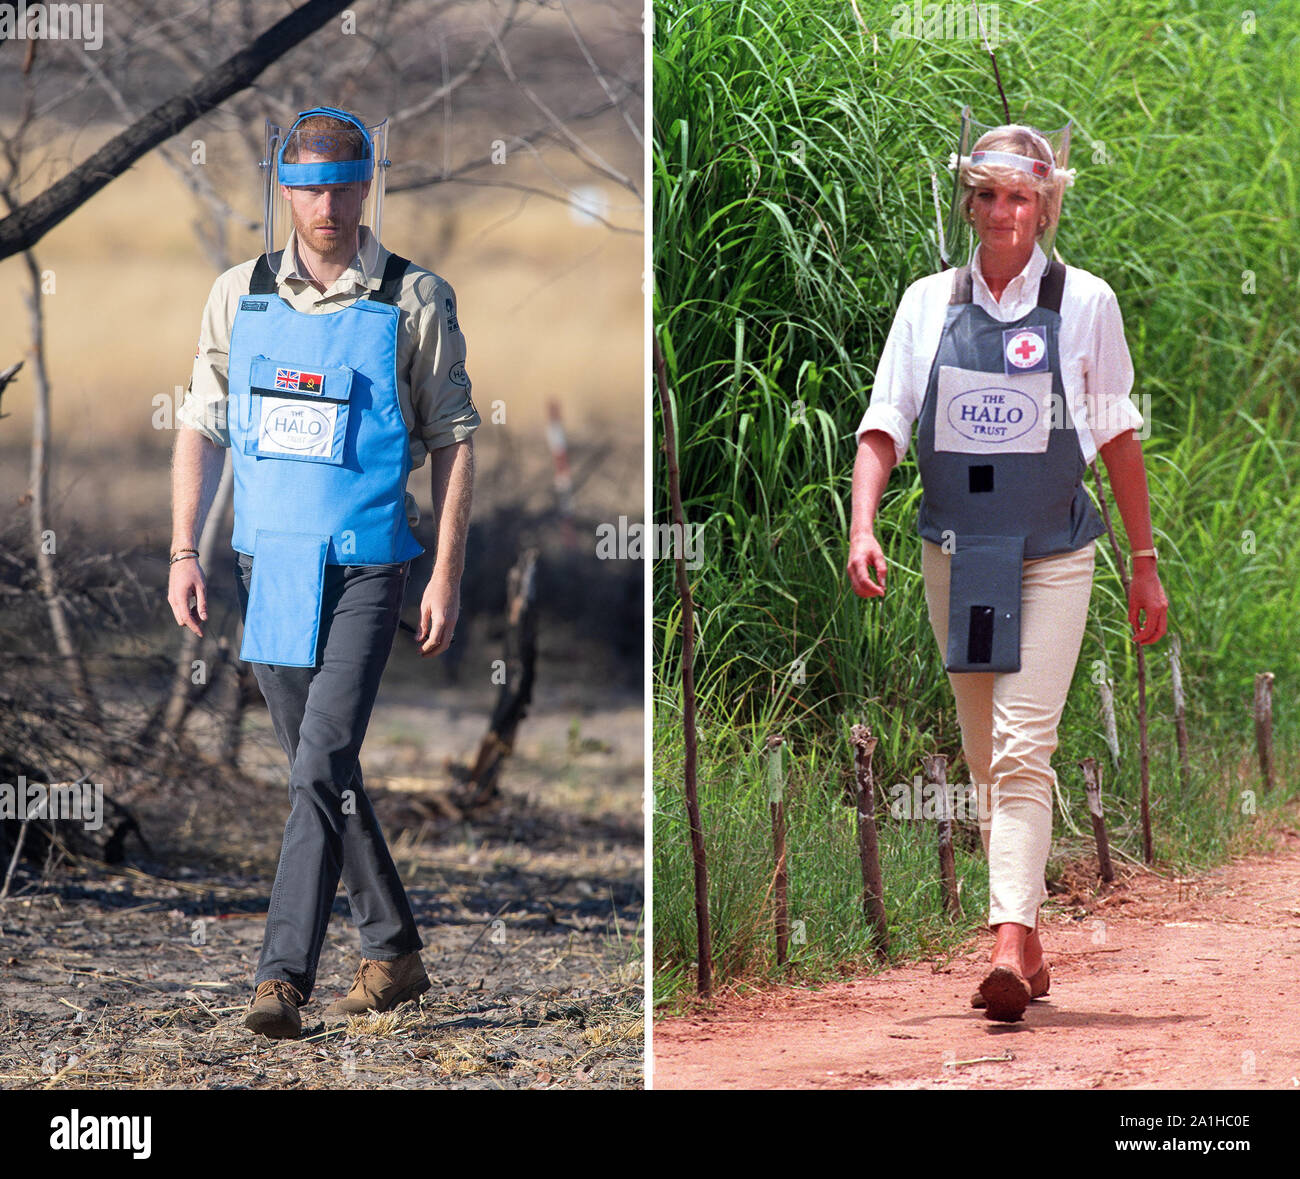 A composite image showing the Princess of Wales on 15/01/97 during her visit to a minefield in Huambo, in Angola, and the Duke of Sussex on 27/09/19 walking through a minefield in Dirico, Angola. Stock Photo